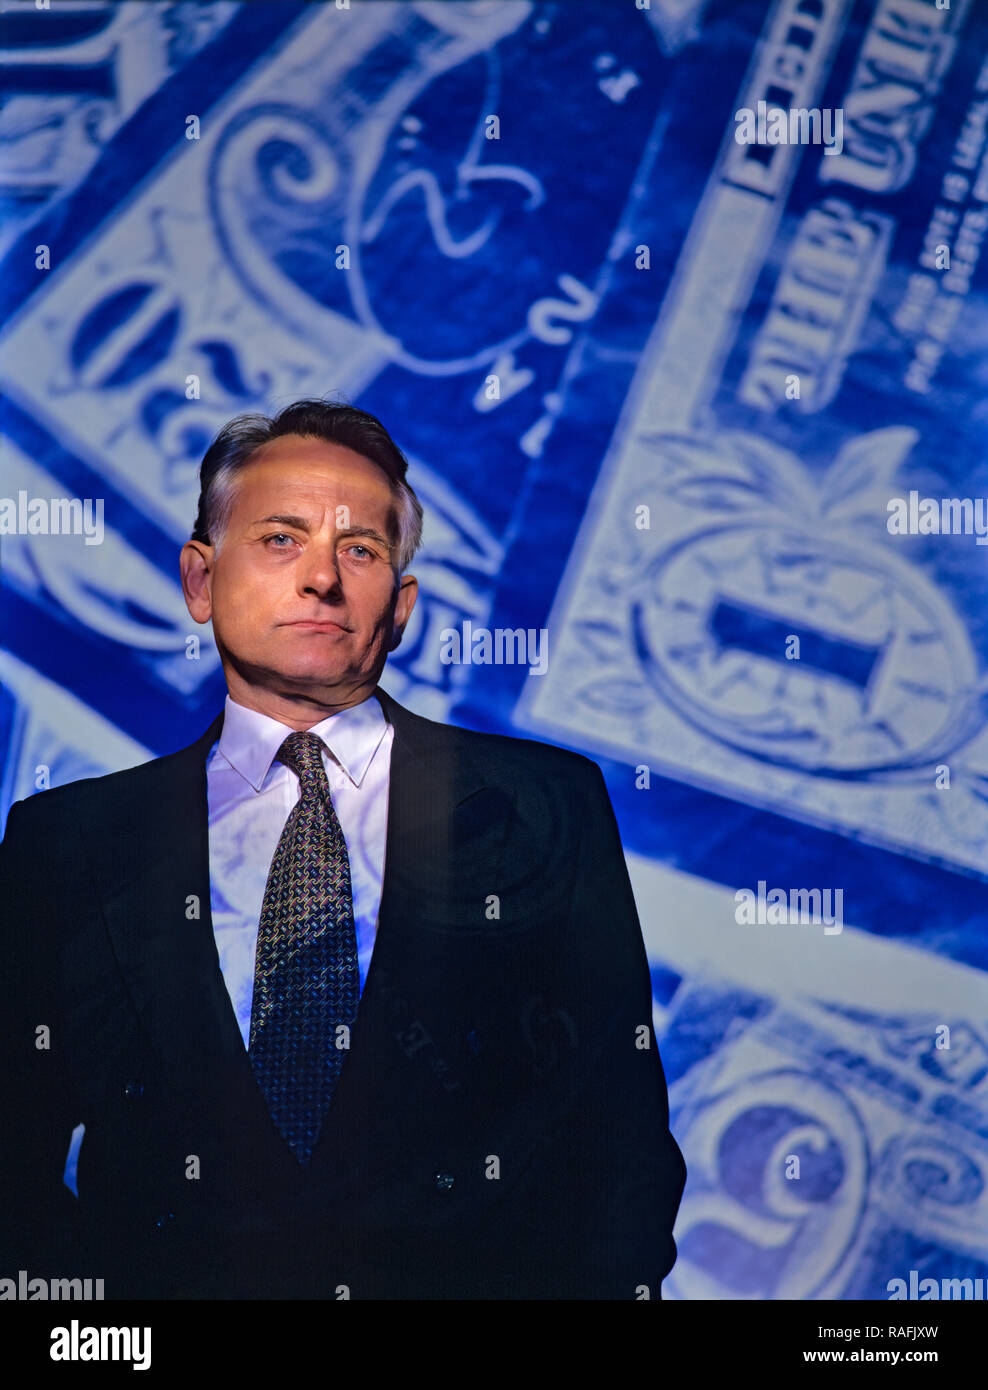 Mature businessman or banker standing in front of a paper currency background with symbolism of greed, corruption and deceit on his face Stock Photo